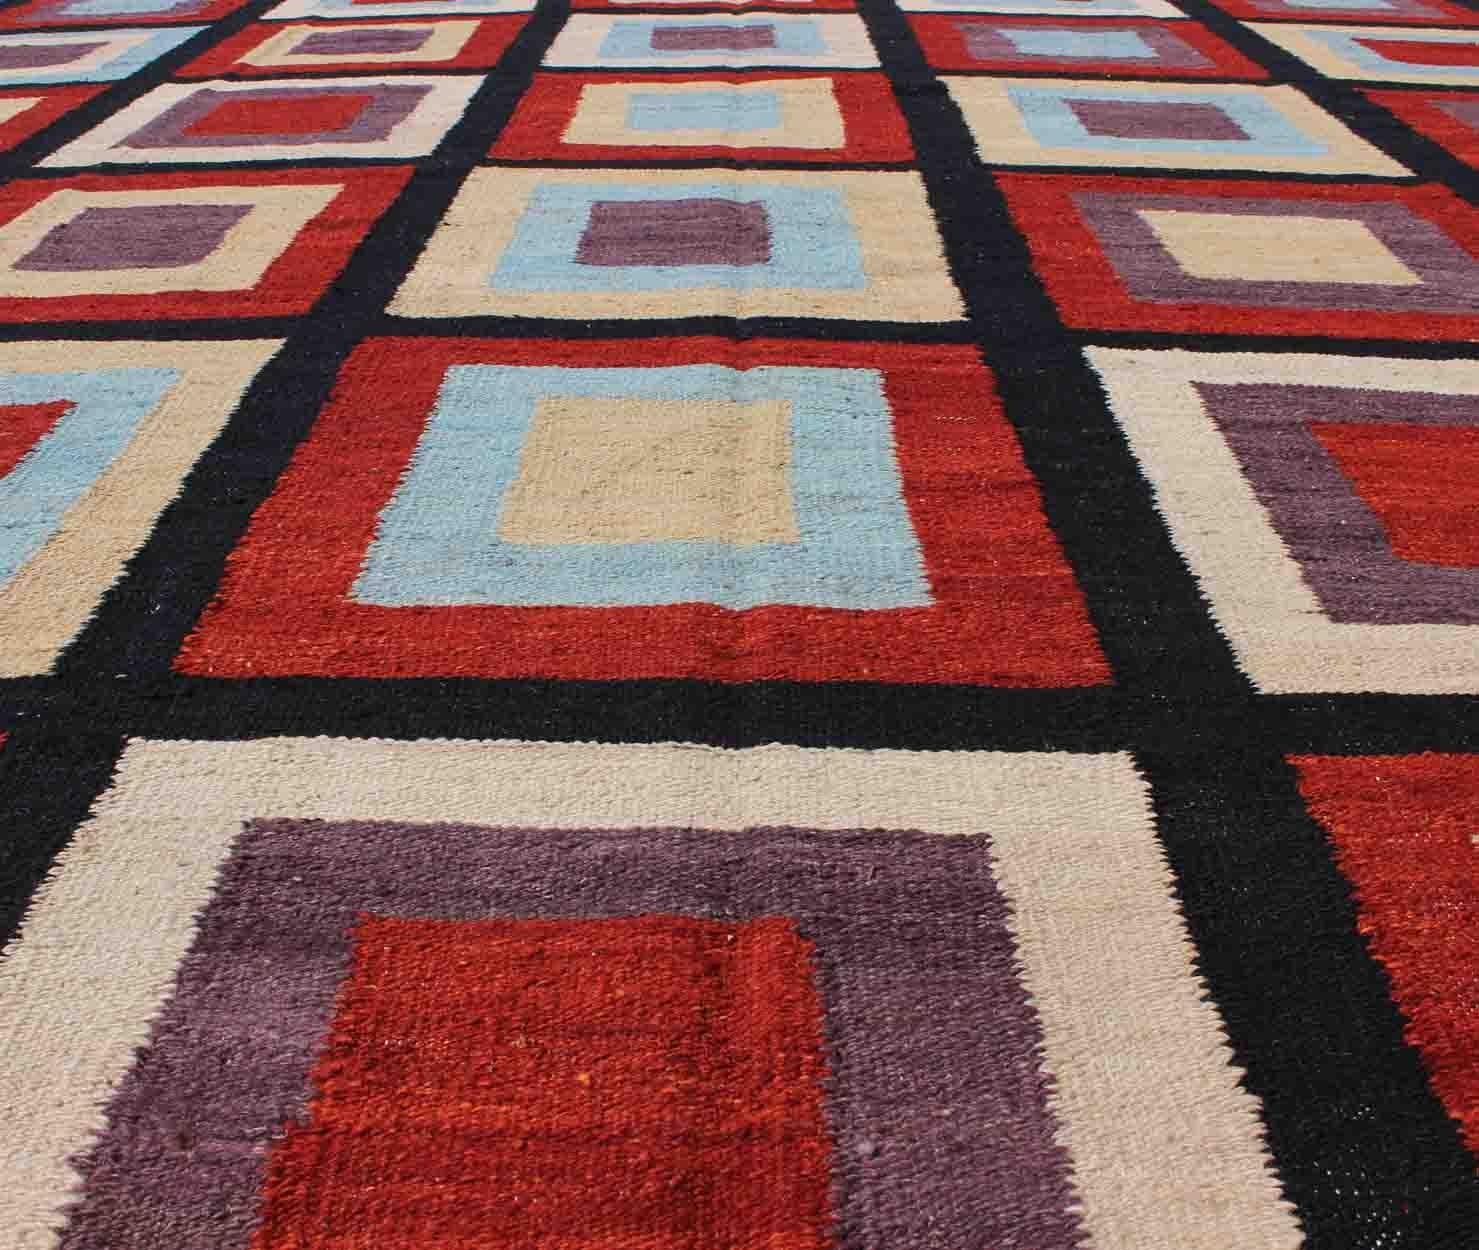 Late 20th Century Large Modern Kilim Rug with Squared Design in Red, Blue, Black, Cream, Purple